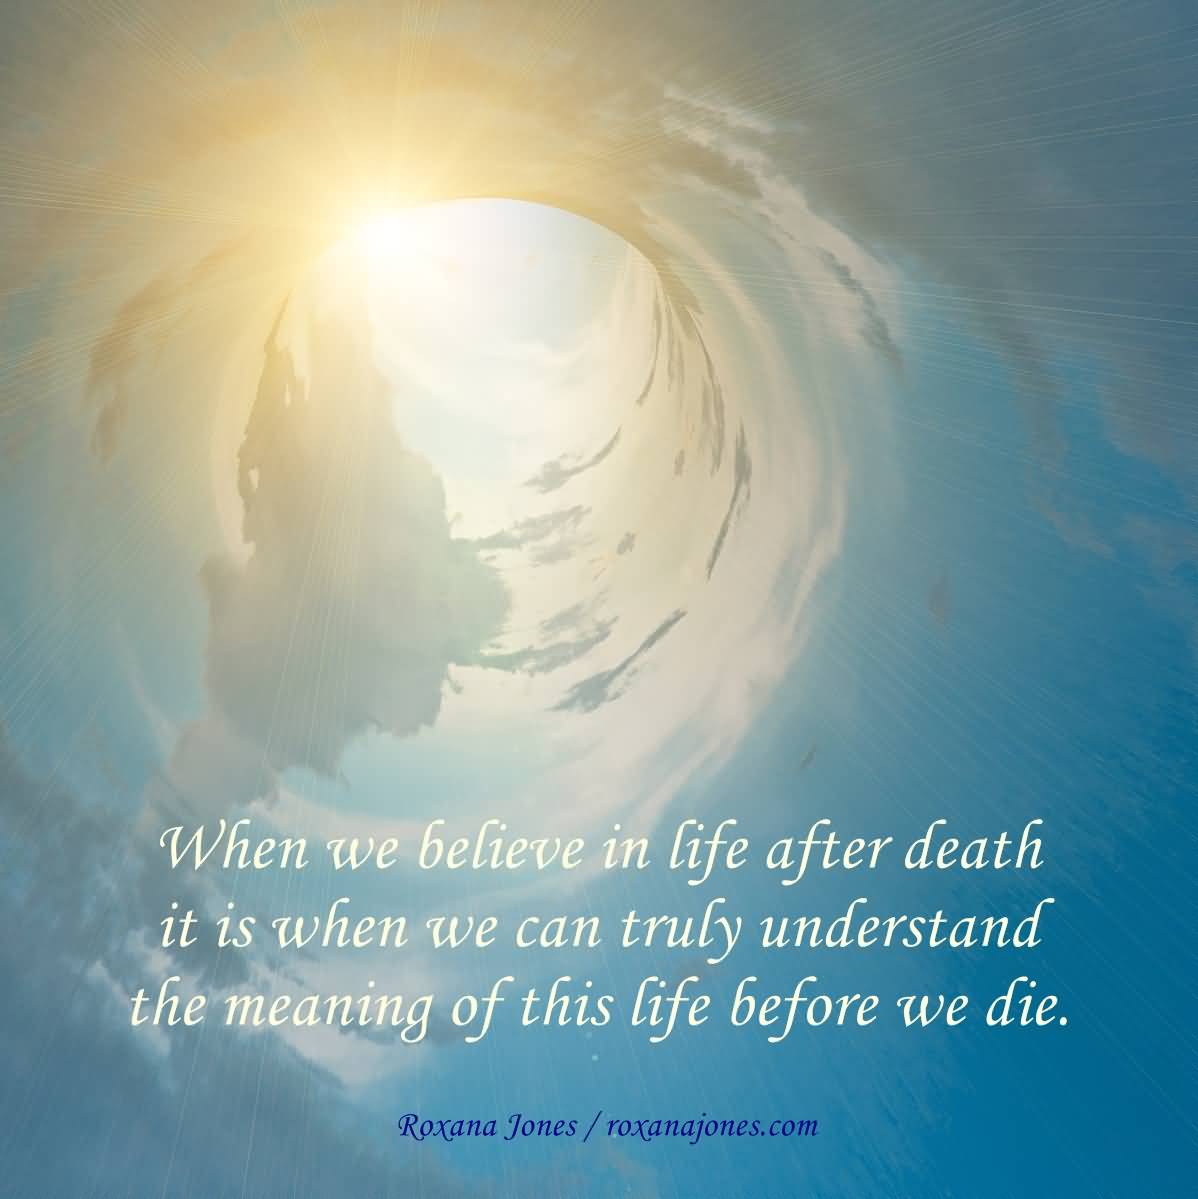 Inspirational Quotes Life After Death 11